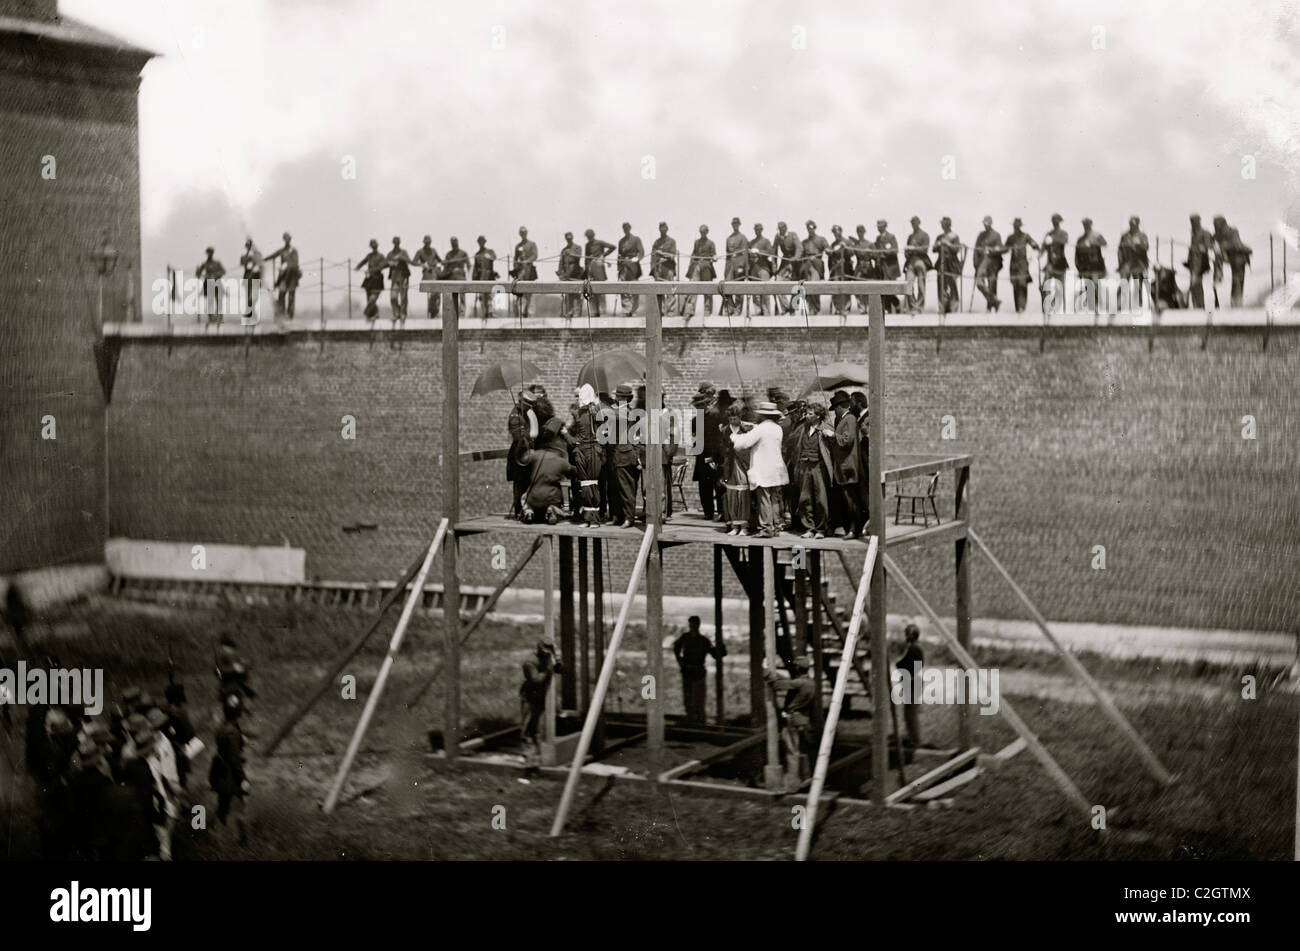 Washington, D.C. Adjusting the ropes for hanging the conspirators Stock Photo